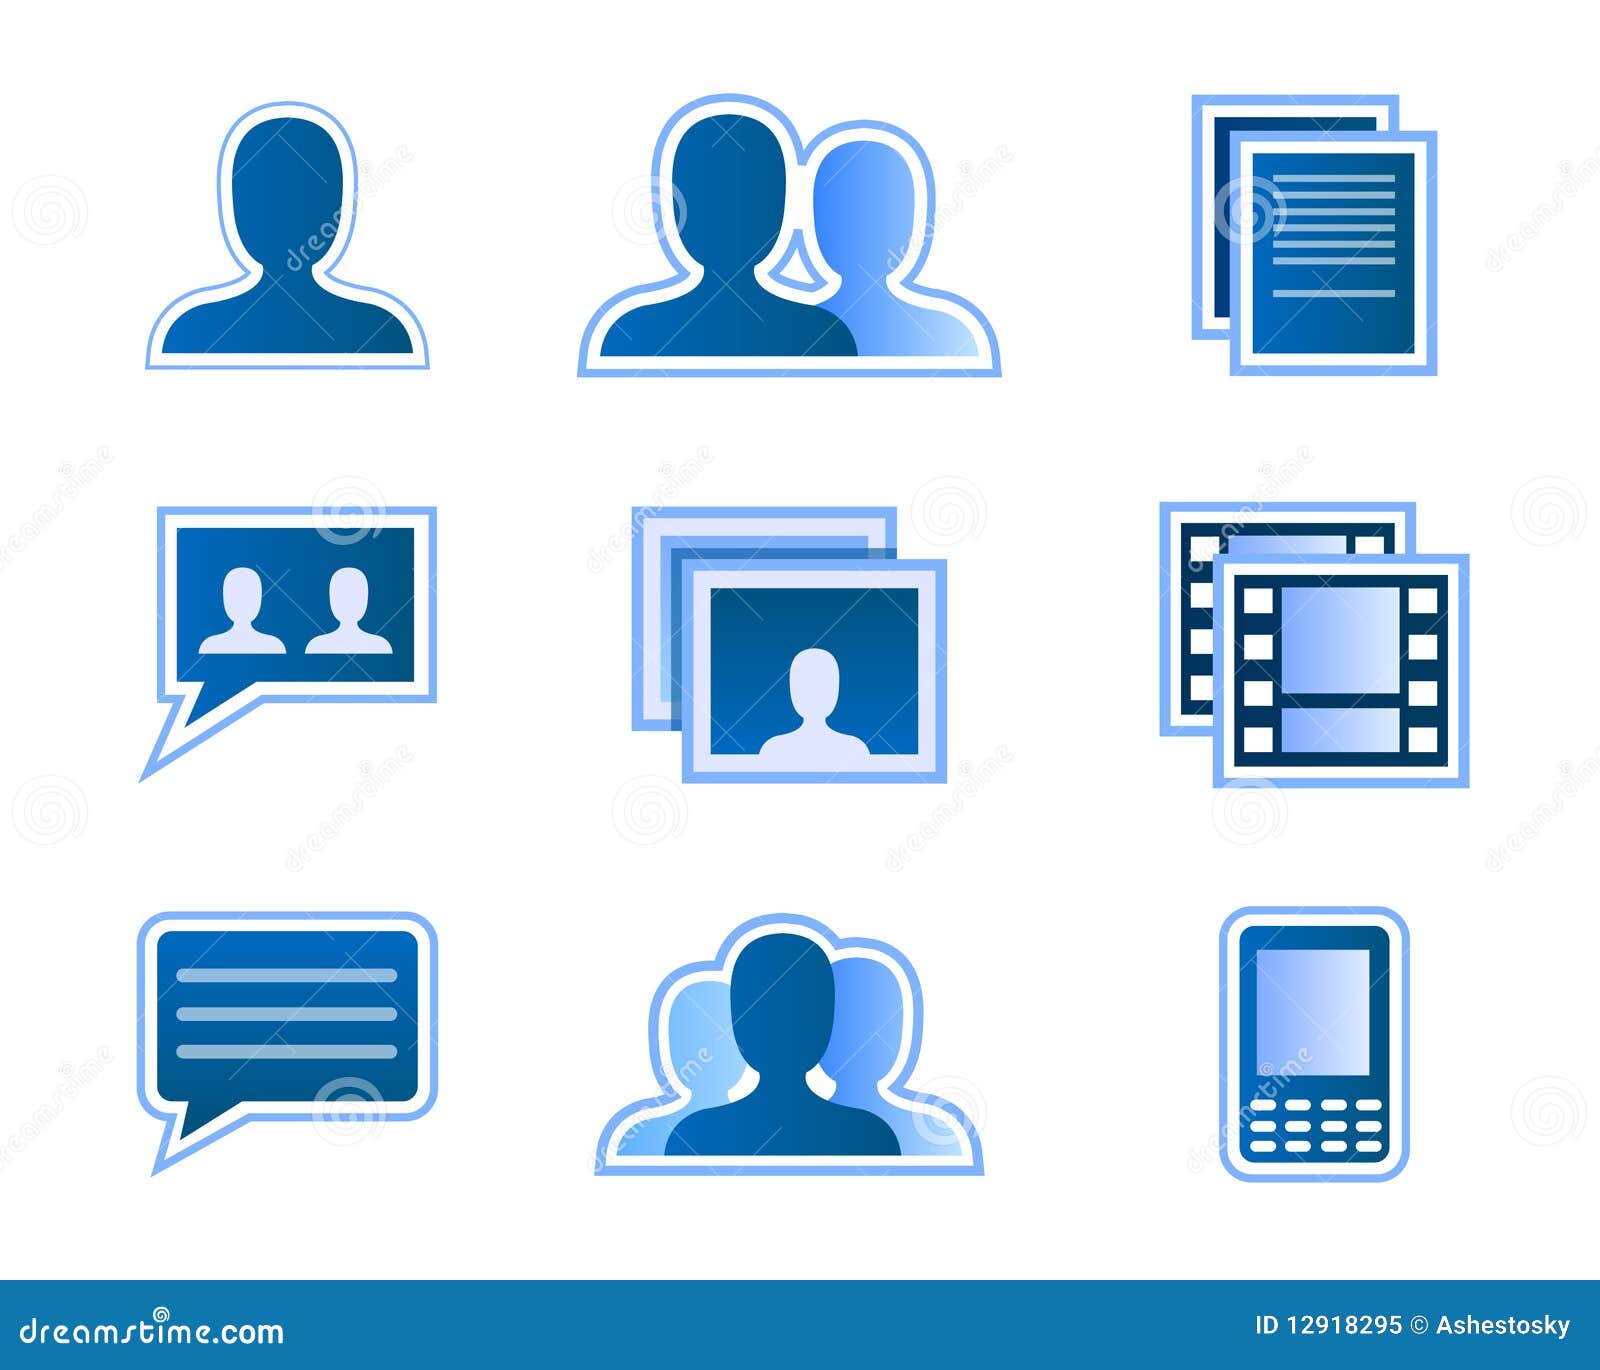 social network user icons